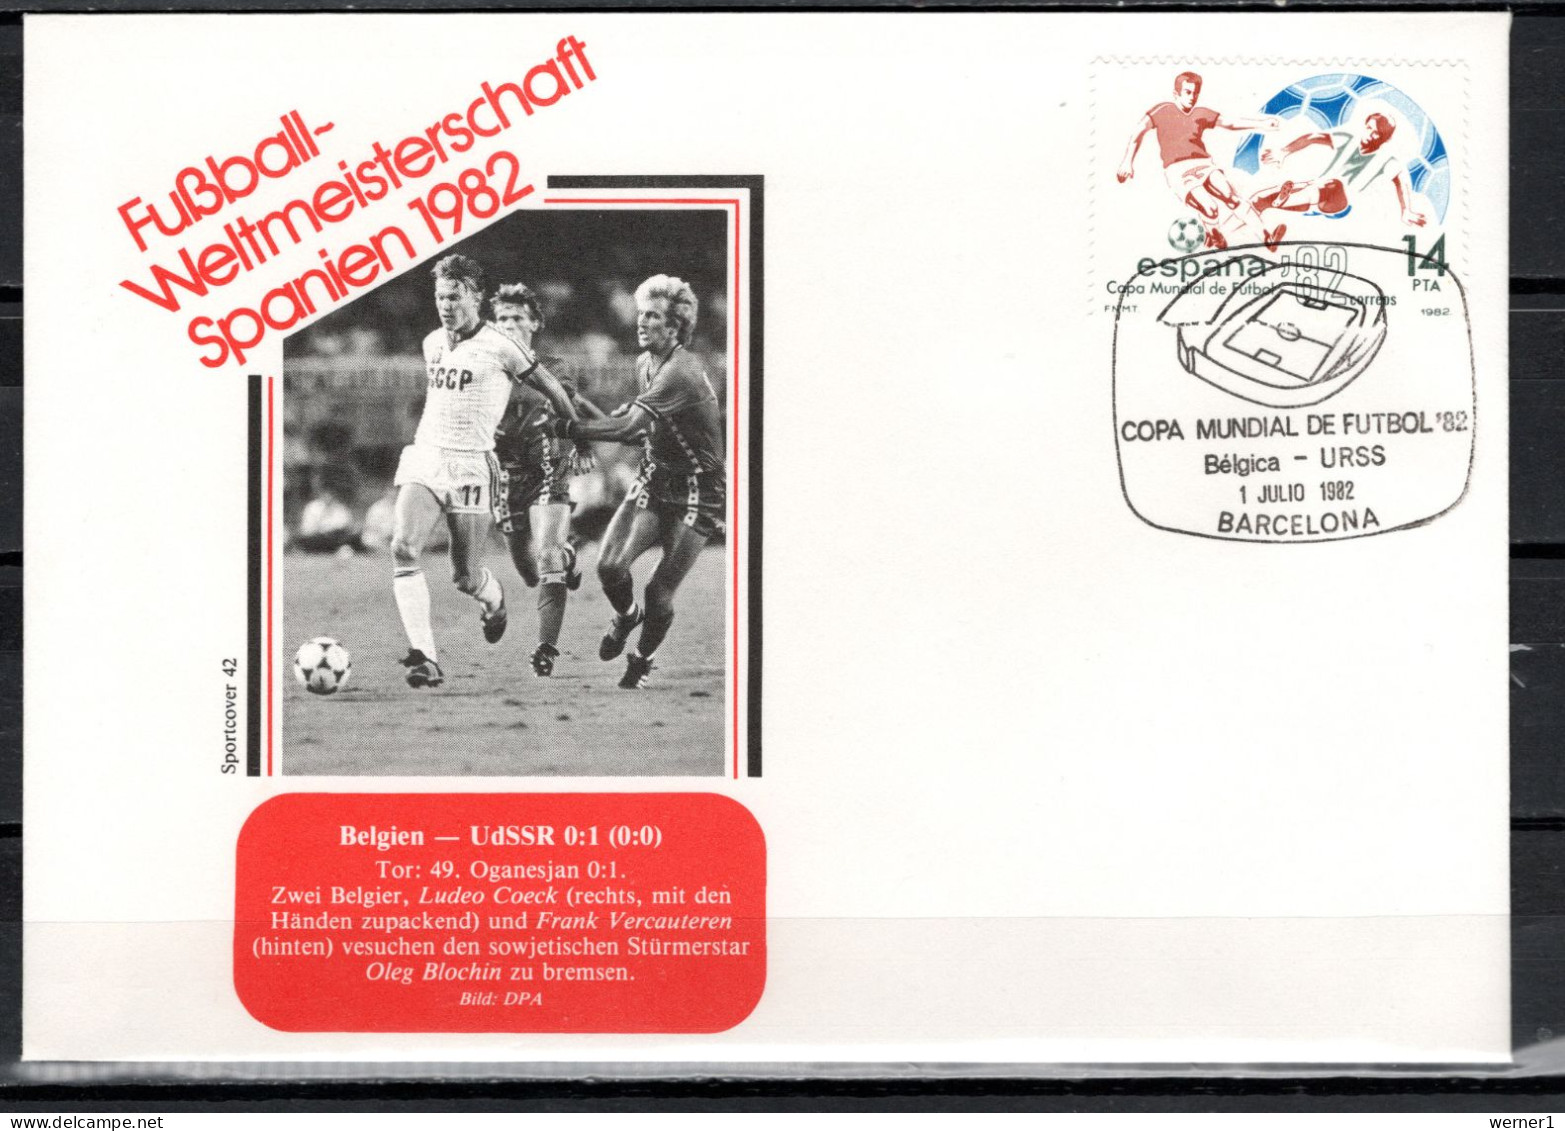 Spain 1982 Football Soccer World Cup Commemorative Cover Match Belgium - USSR 0:1 - 1982 – Espagne